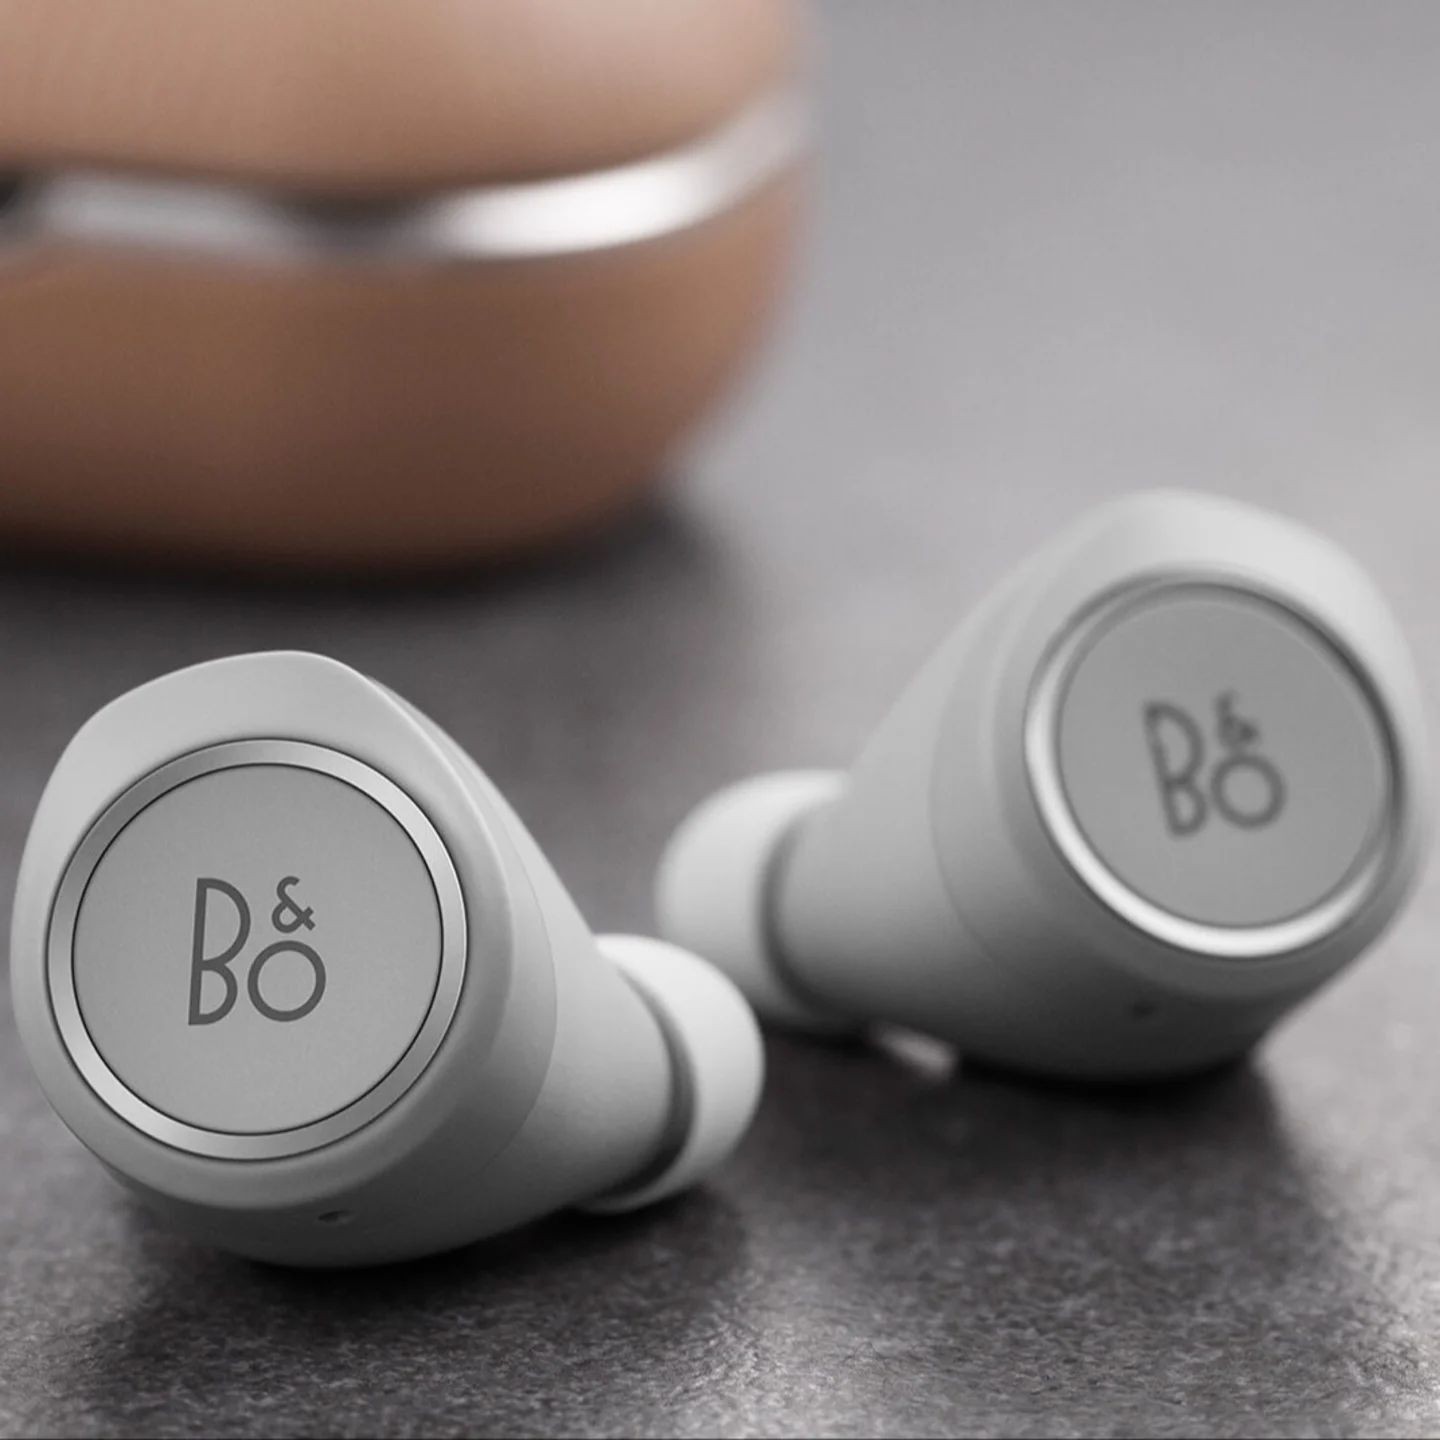 Promotional shot of the Beoplay E8 2.0